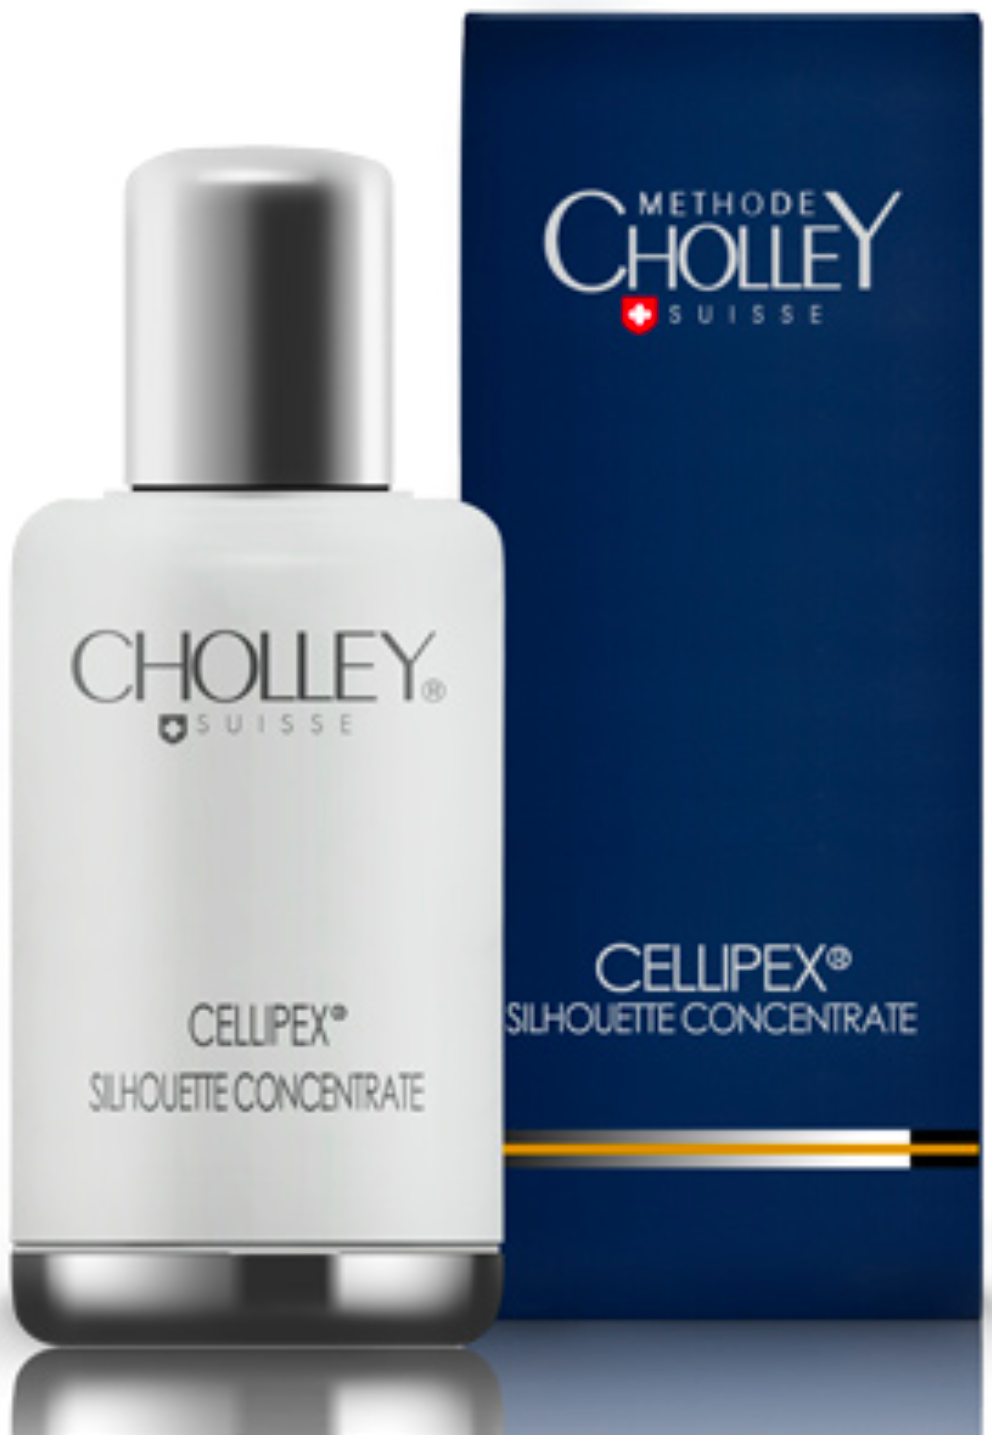 Methode Cholley 特濃滅脂去紋乳 CELLIPEX® SLIMMING CONCENTRATE